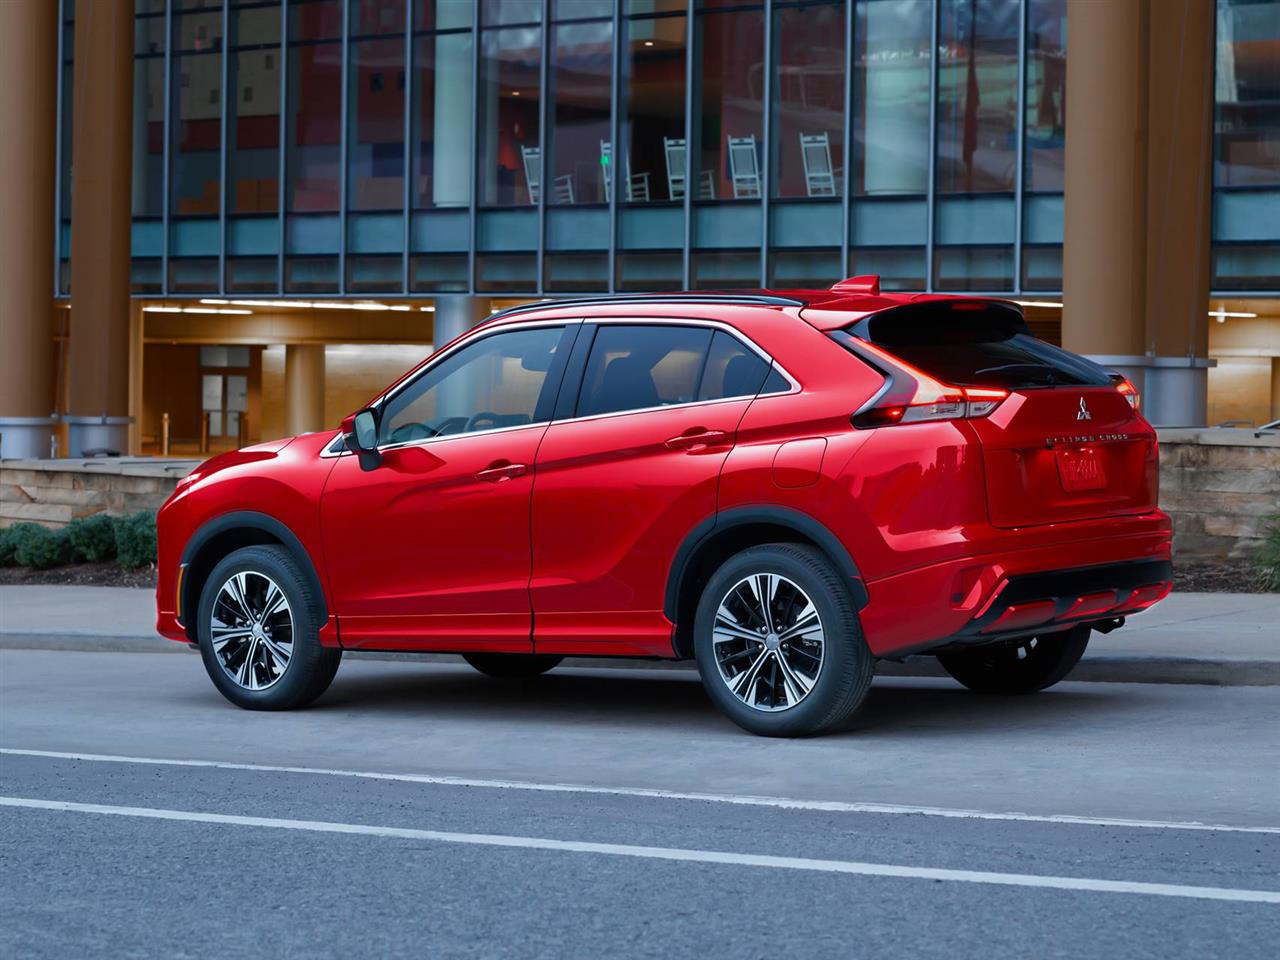 2021 Mitsubishi Eclipse Cross Features, Specs and Pricing 2